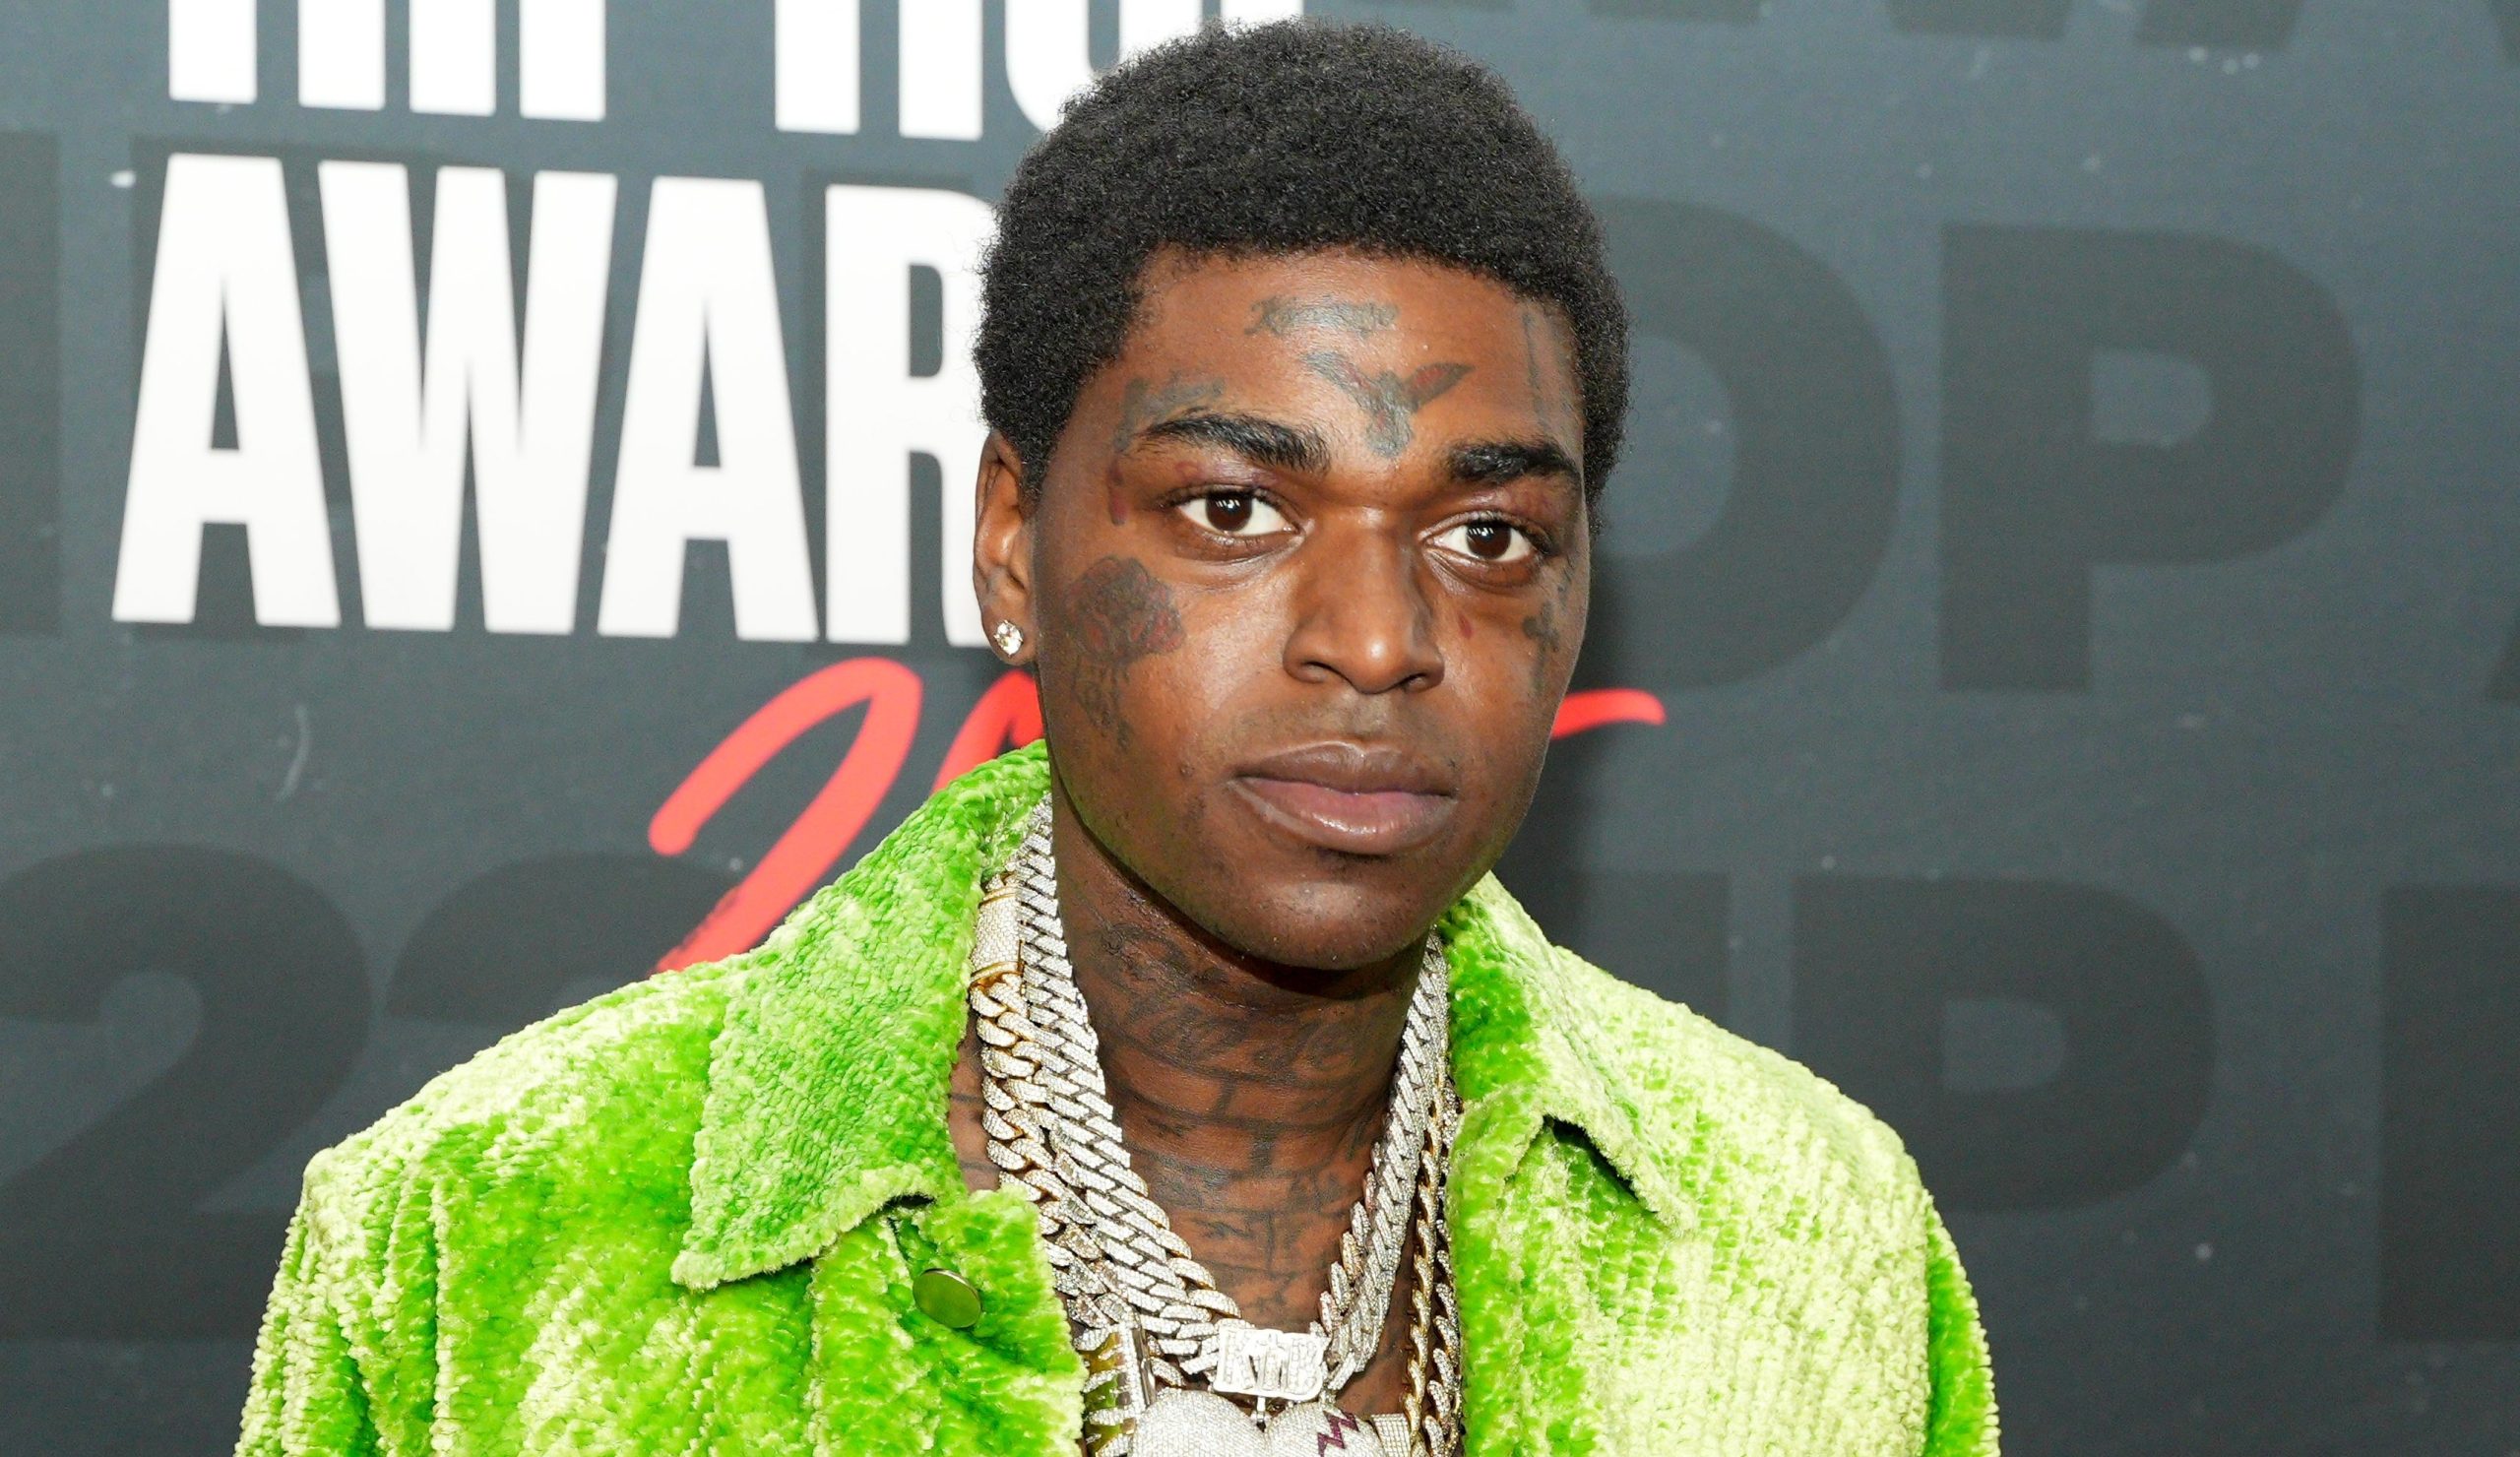 Kodak Black arrested in Miami, placed in Federal Detention Center for possible parole violation - Inmate Lookup